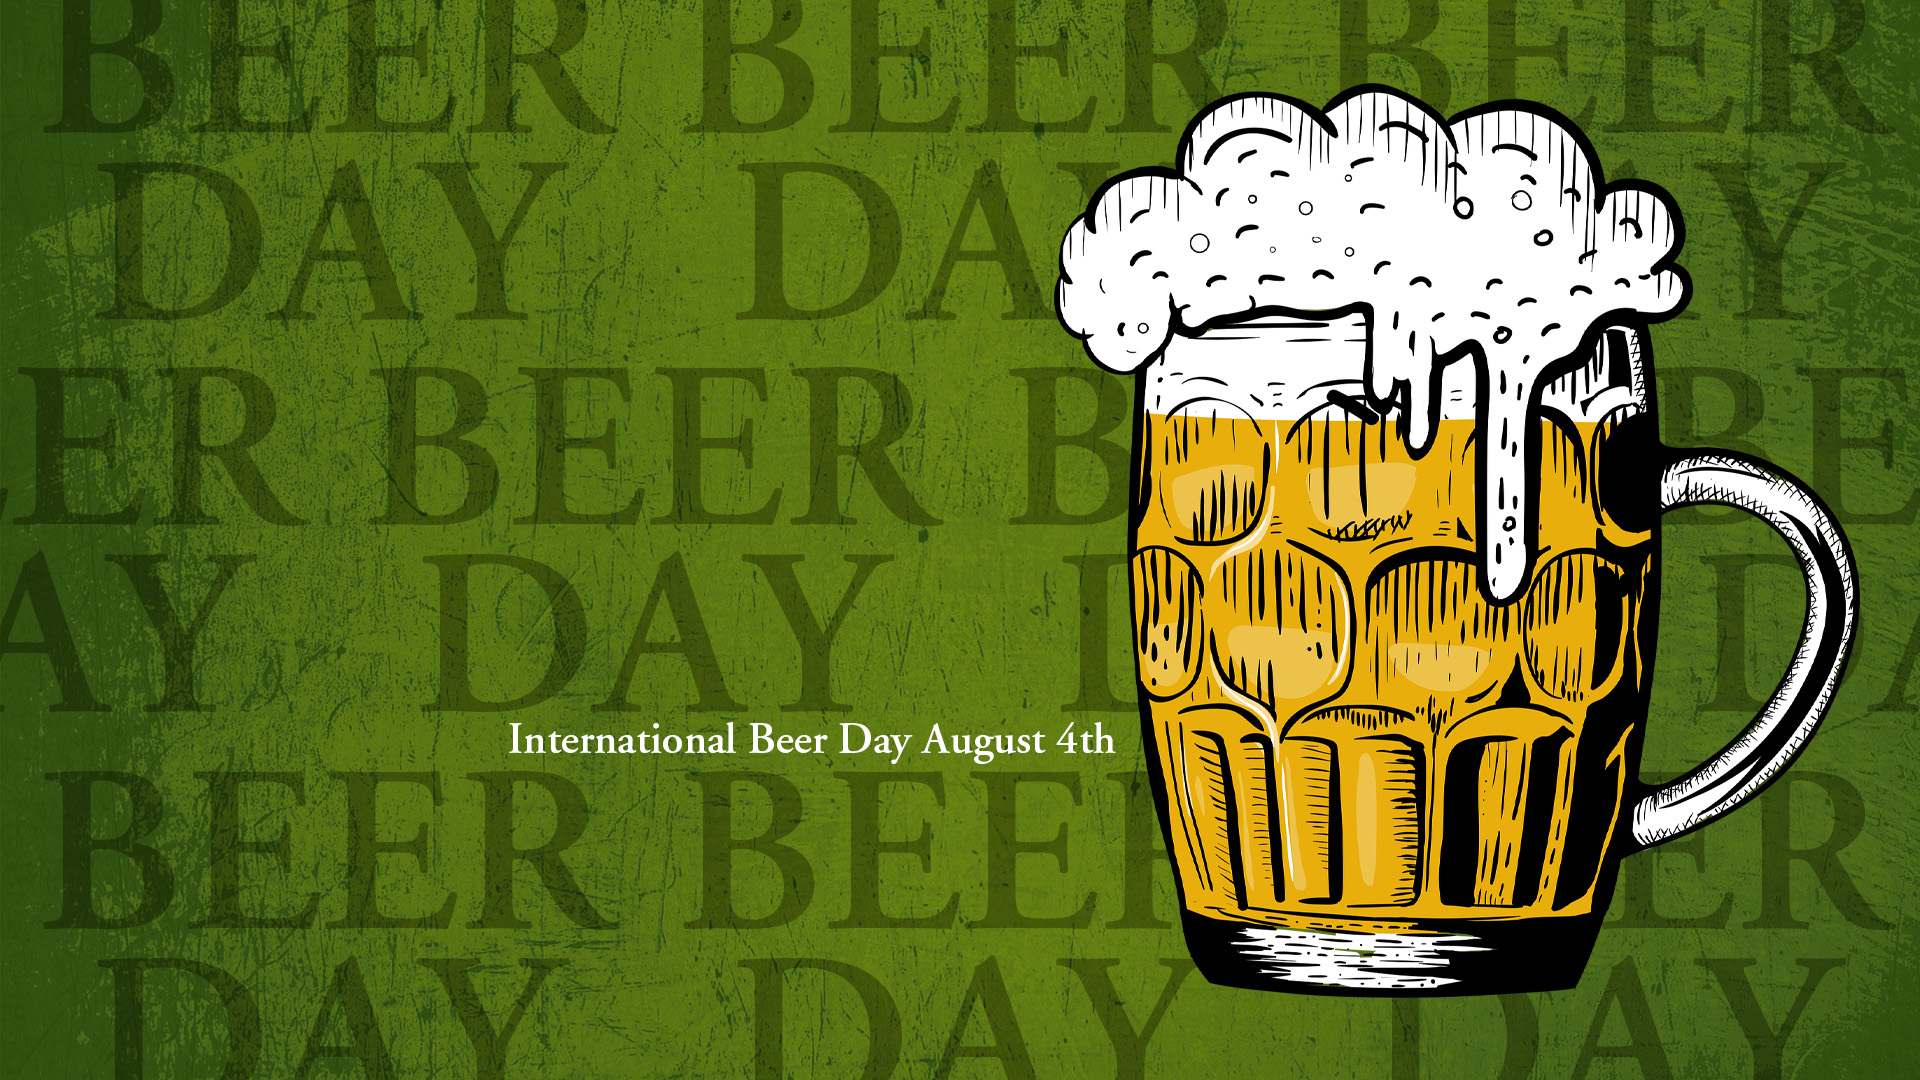 Background is a grungy green texture and Beer Day is written in capital letters and repeats itself across the whole image. There is a grungy grawn beer in a mug with foam coming out the top and sliding down the glass. International Beer day August 4th is written in a white serif font.